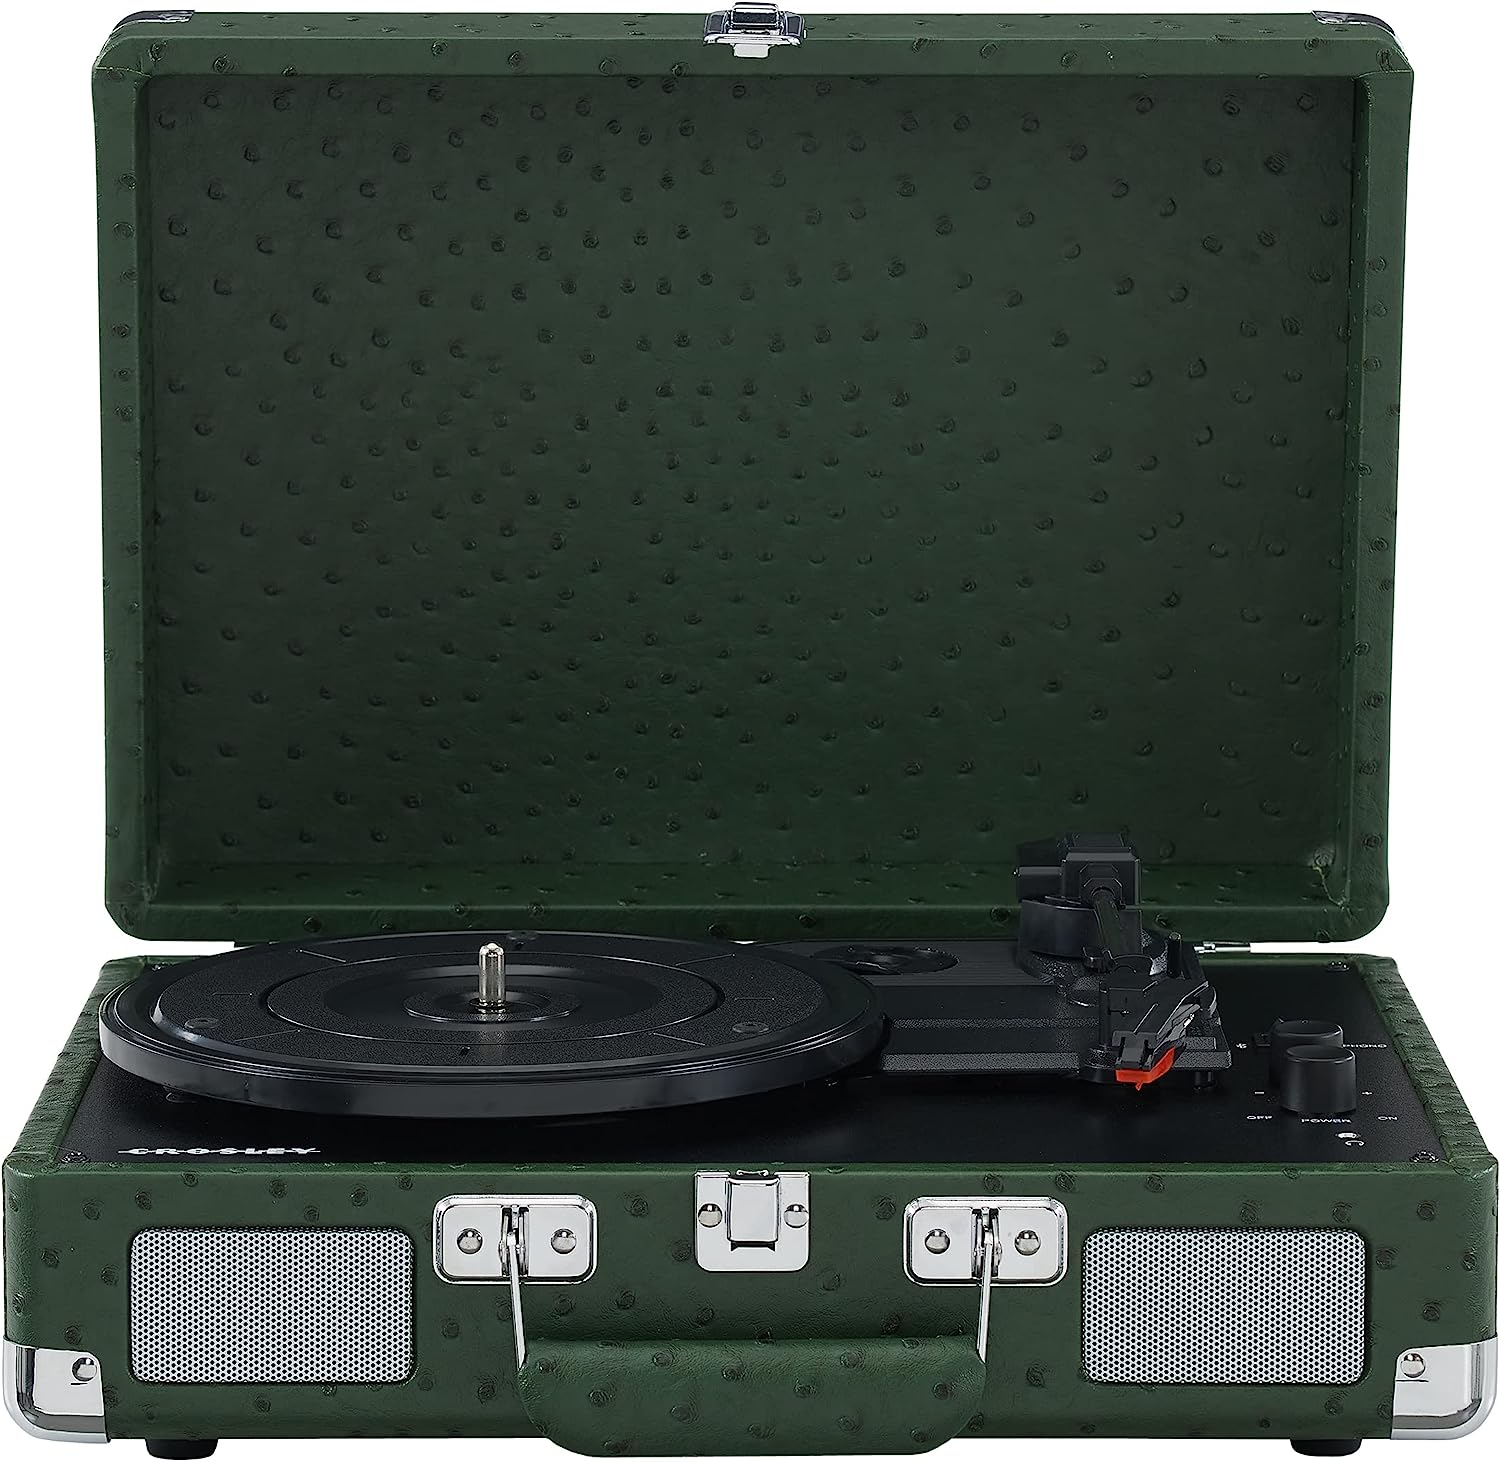 Crosley CR8005F-MT Cruiser Plus Vintage 3-Speed Bluetooth in/Out Suitcase Vinyl Account Player Turntable, Mint